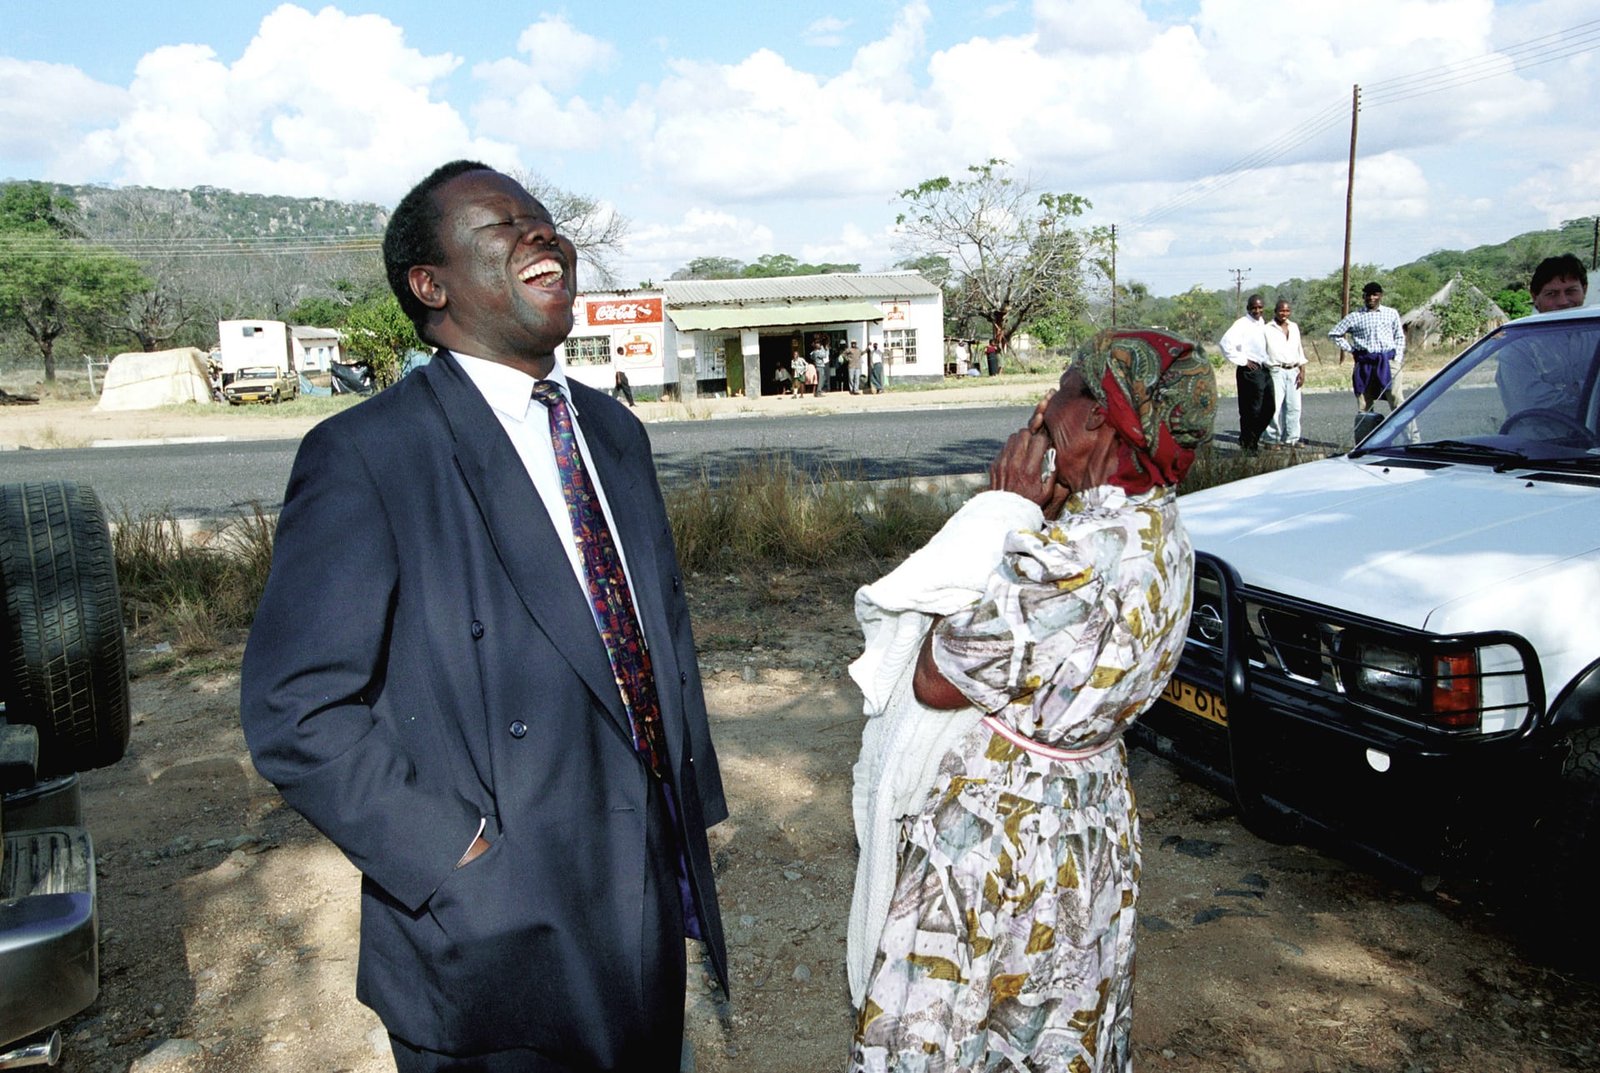 Tsvangirai on his way to vote in parliamentary elections in June 2000. Photograph: Per-Anders Pettersson/Getty Images